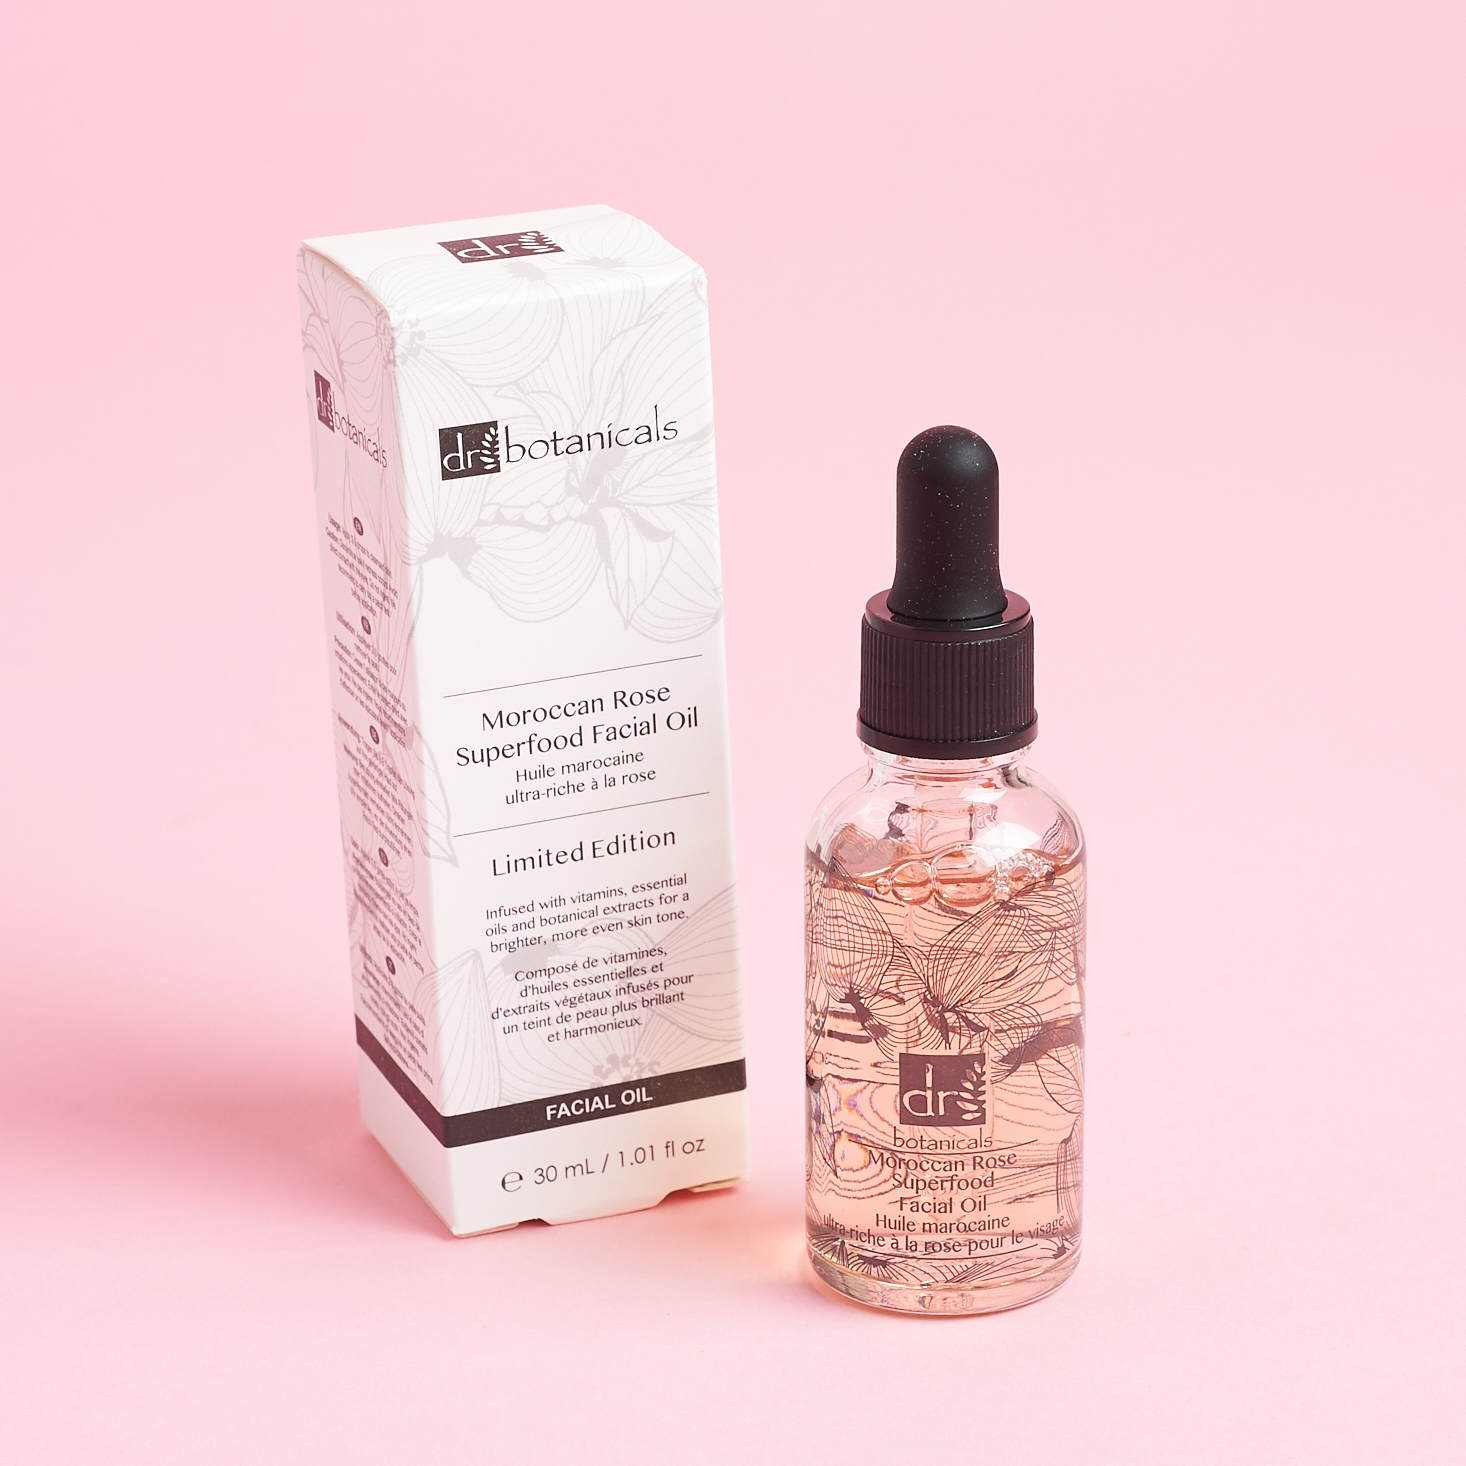 Dr Botanicals Moroccan Rose Superfood Facial Oil with box